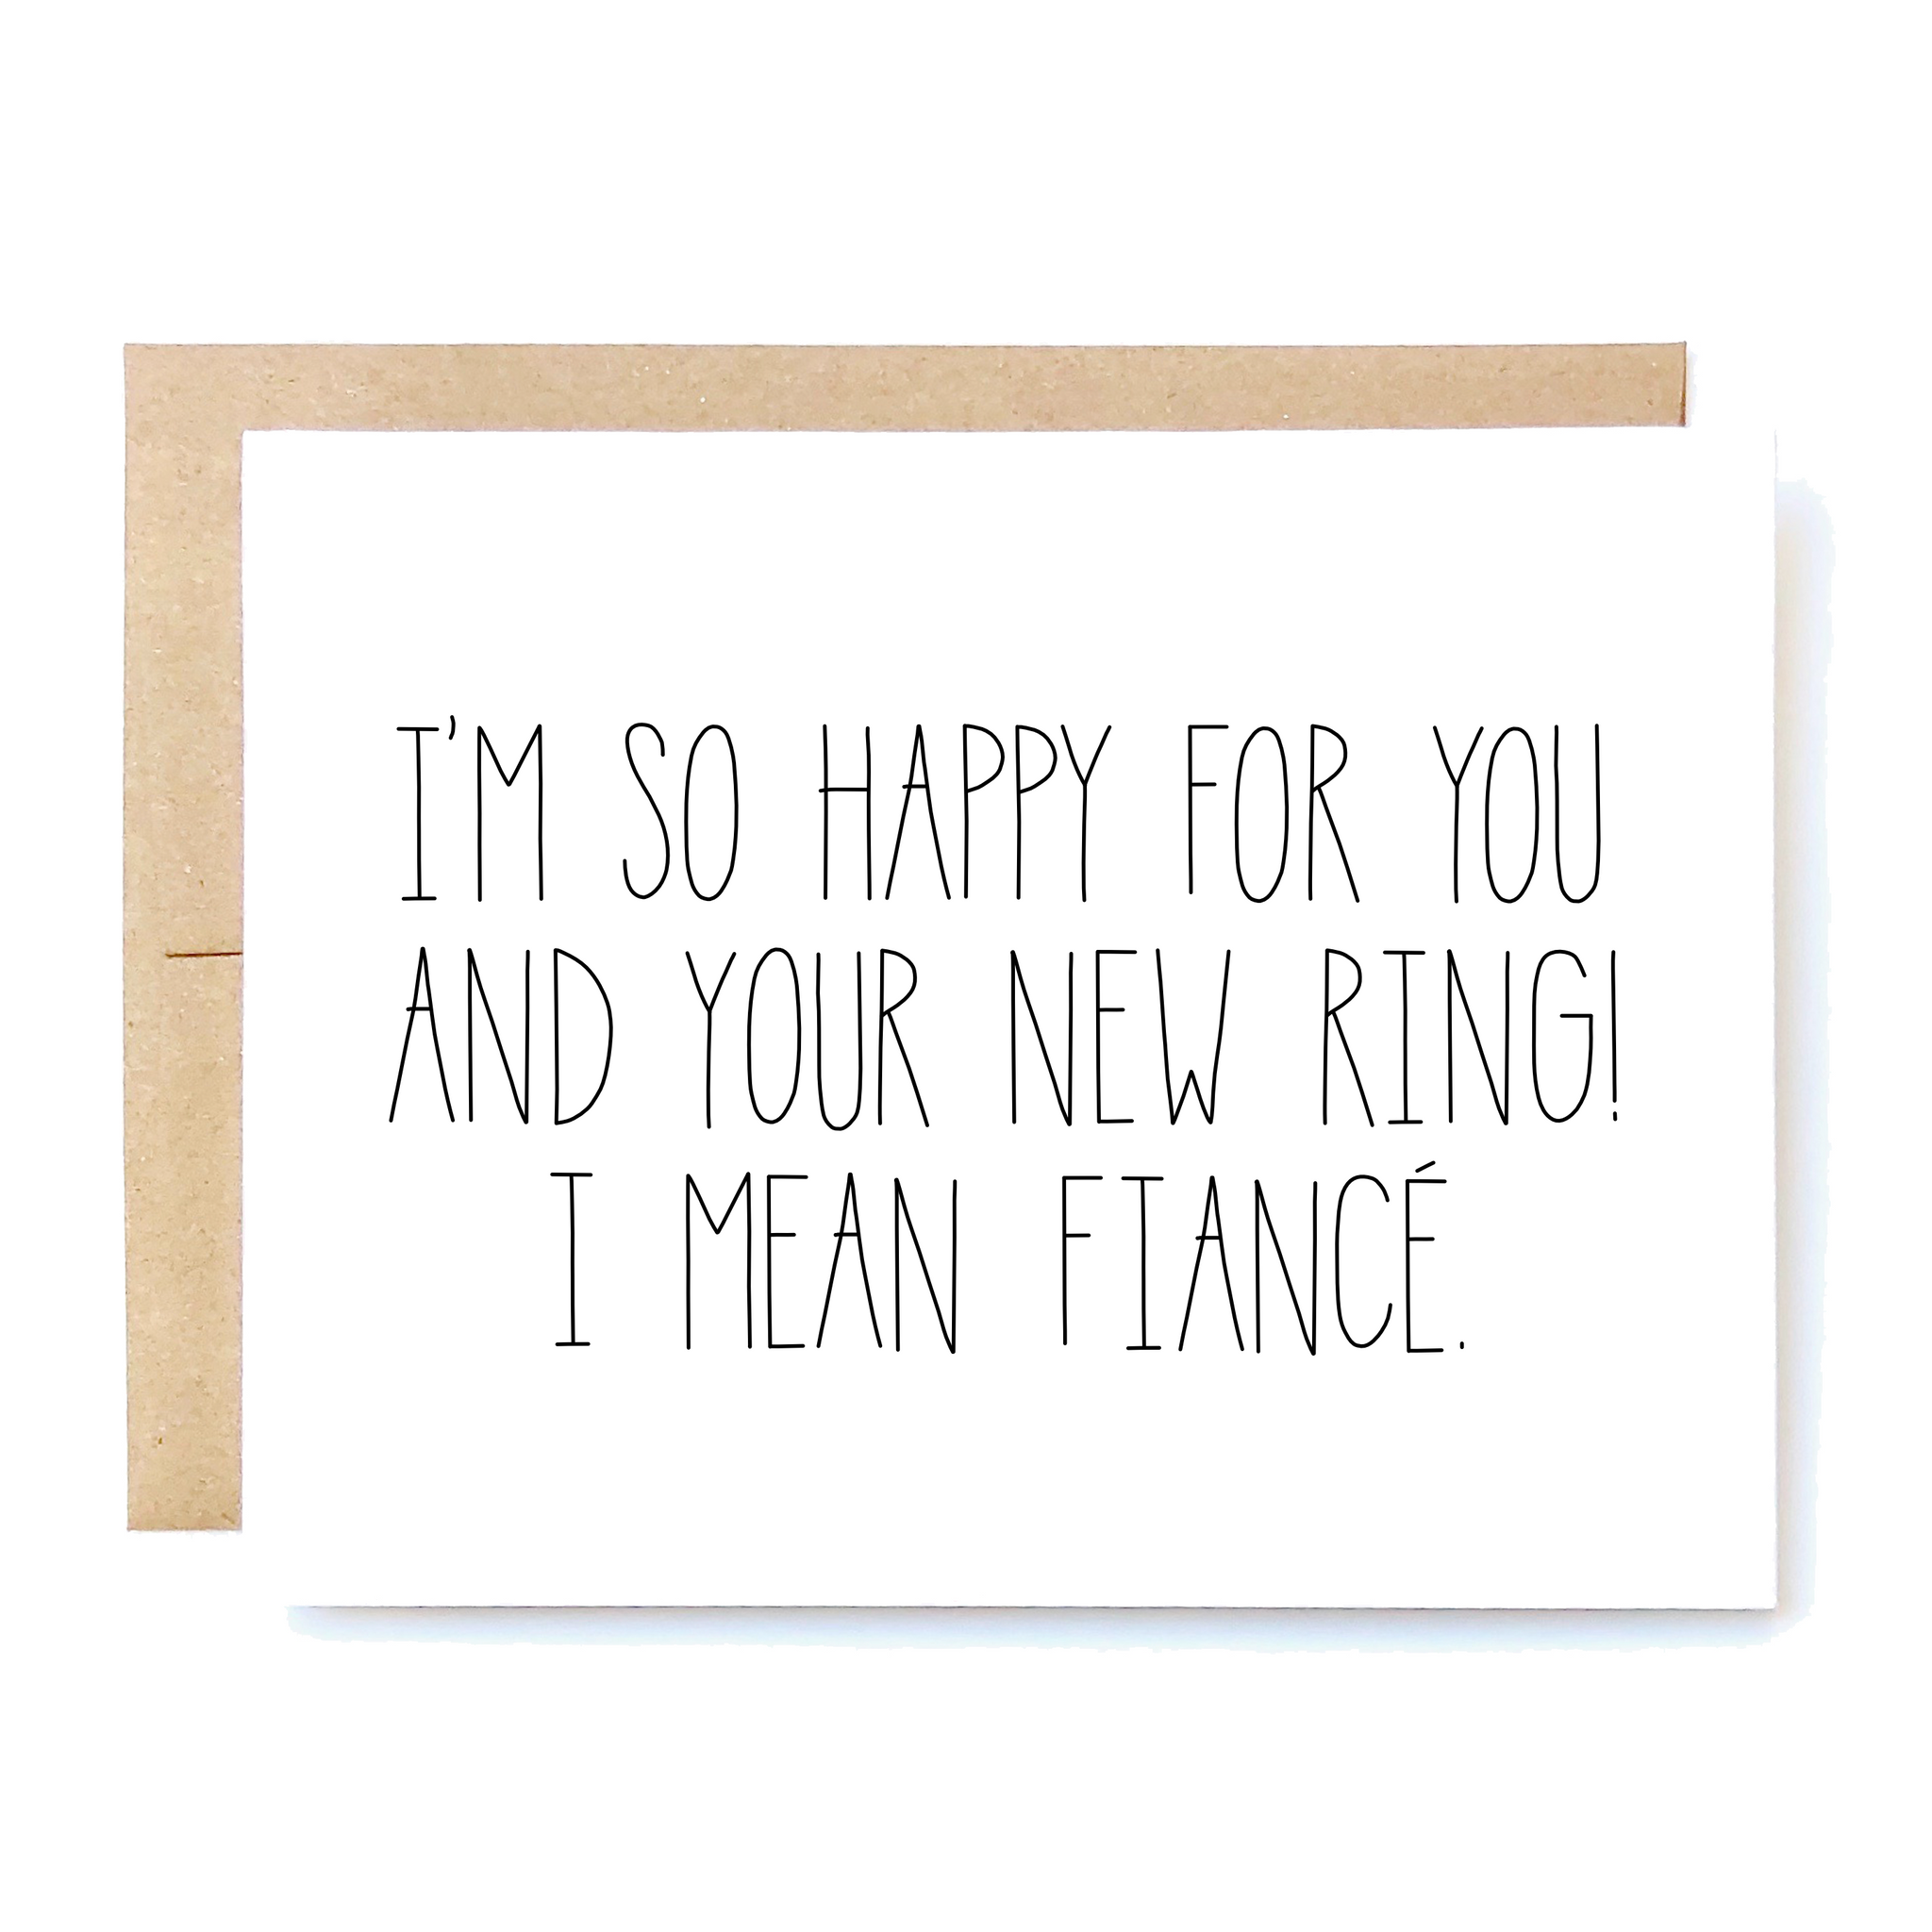 Card Front: I'm so happy for you and your new ring! I mean fiancé.